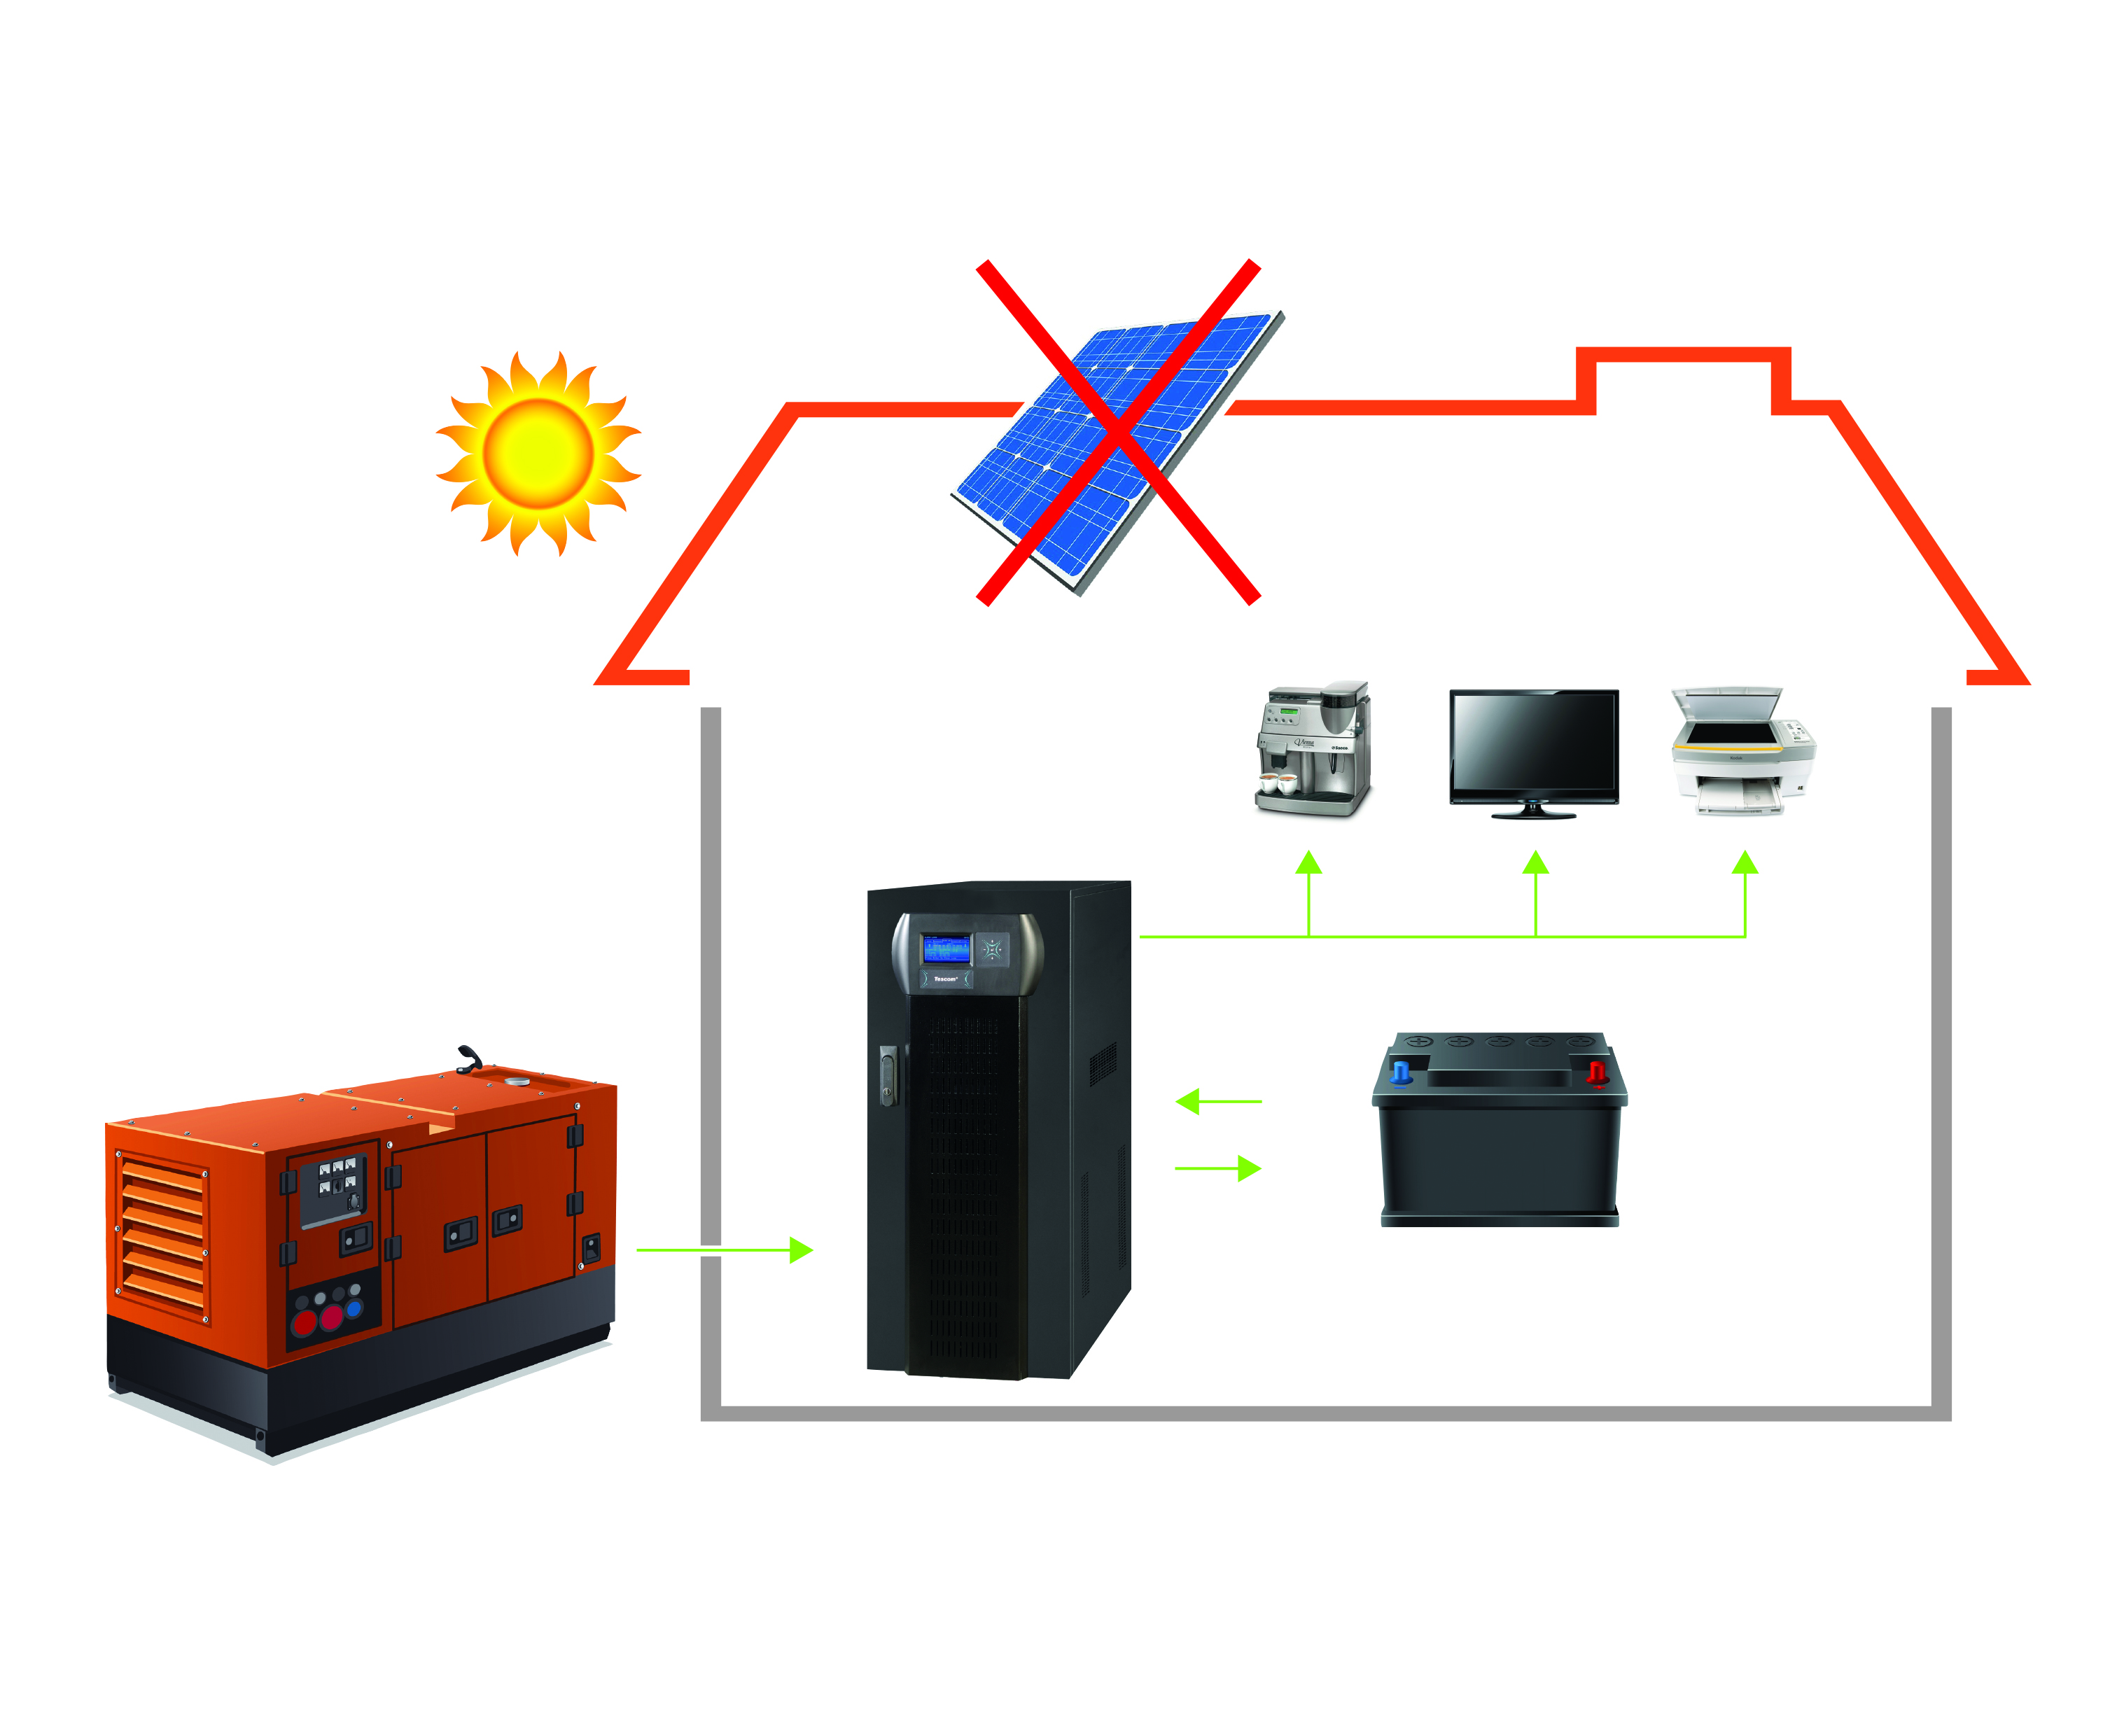 Tescom Hybrid UPS - Unavailability of grid, solar and battery group